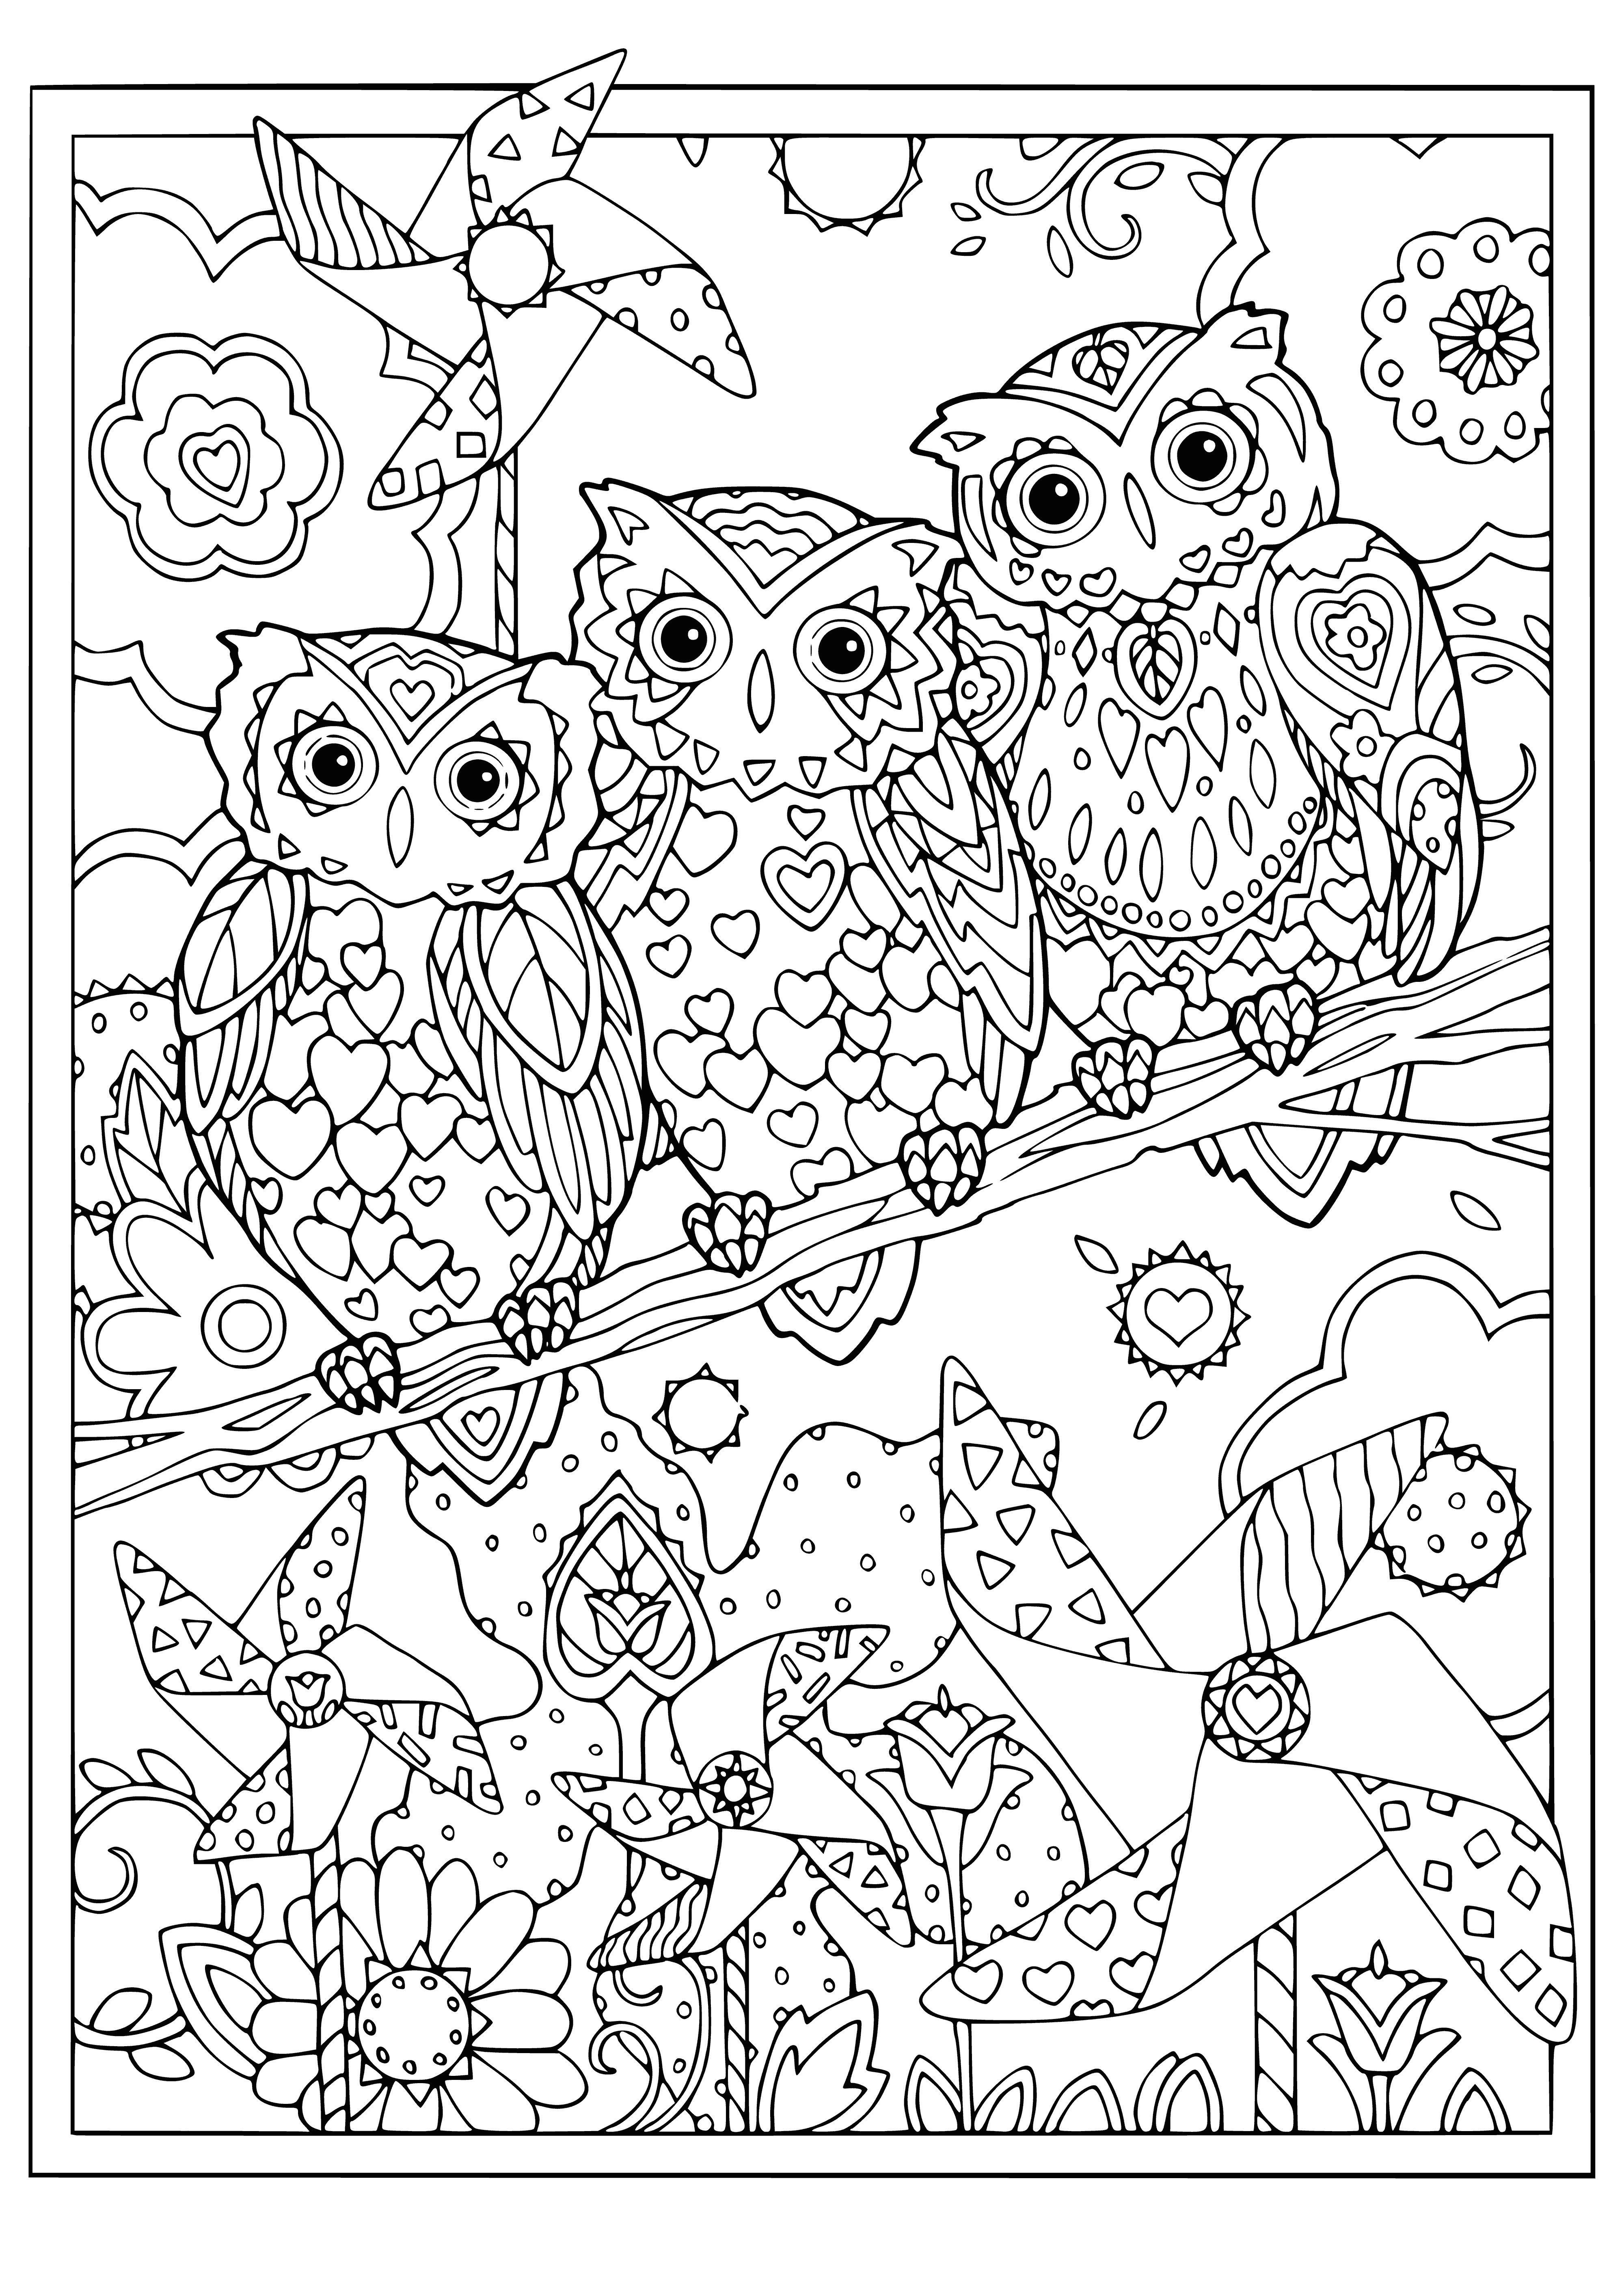 coloring page: Spiral of shapes surround two owls with big eyes in a trance-like state in a multi-colored setting. #colorpage #birdlovers